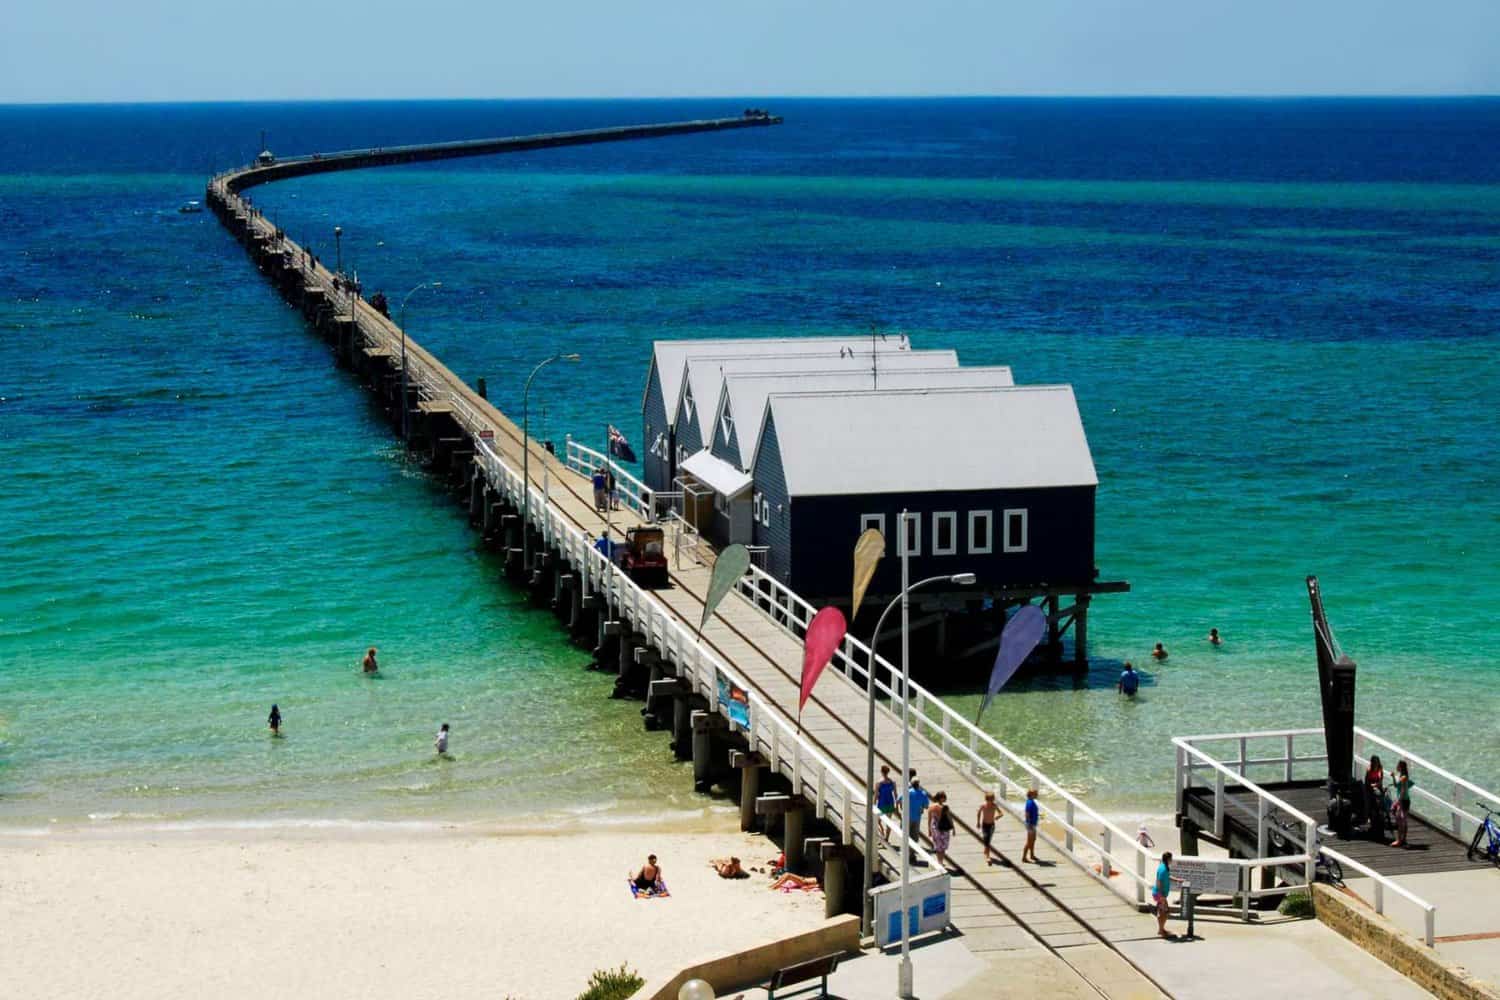 View of Busselton Jetty stretching out to sea on a fine day from Perth to Busselton